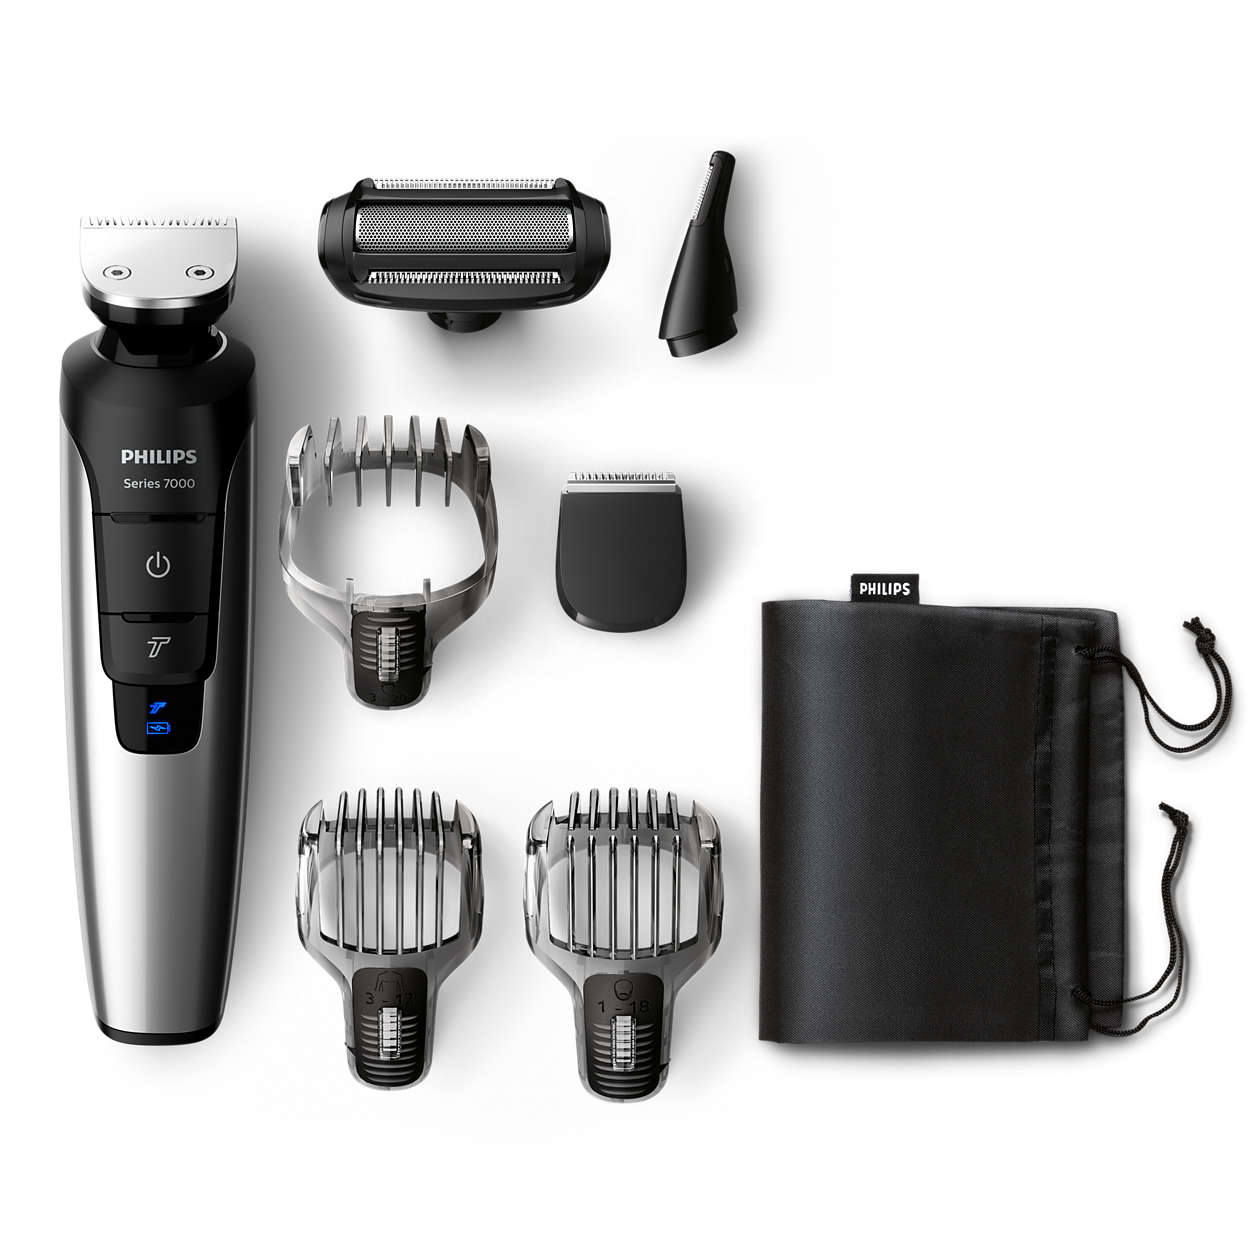 All-in-one lithium-ion beard, hair & body trimmer